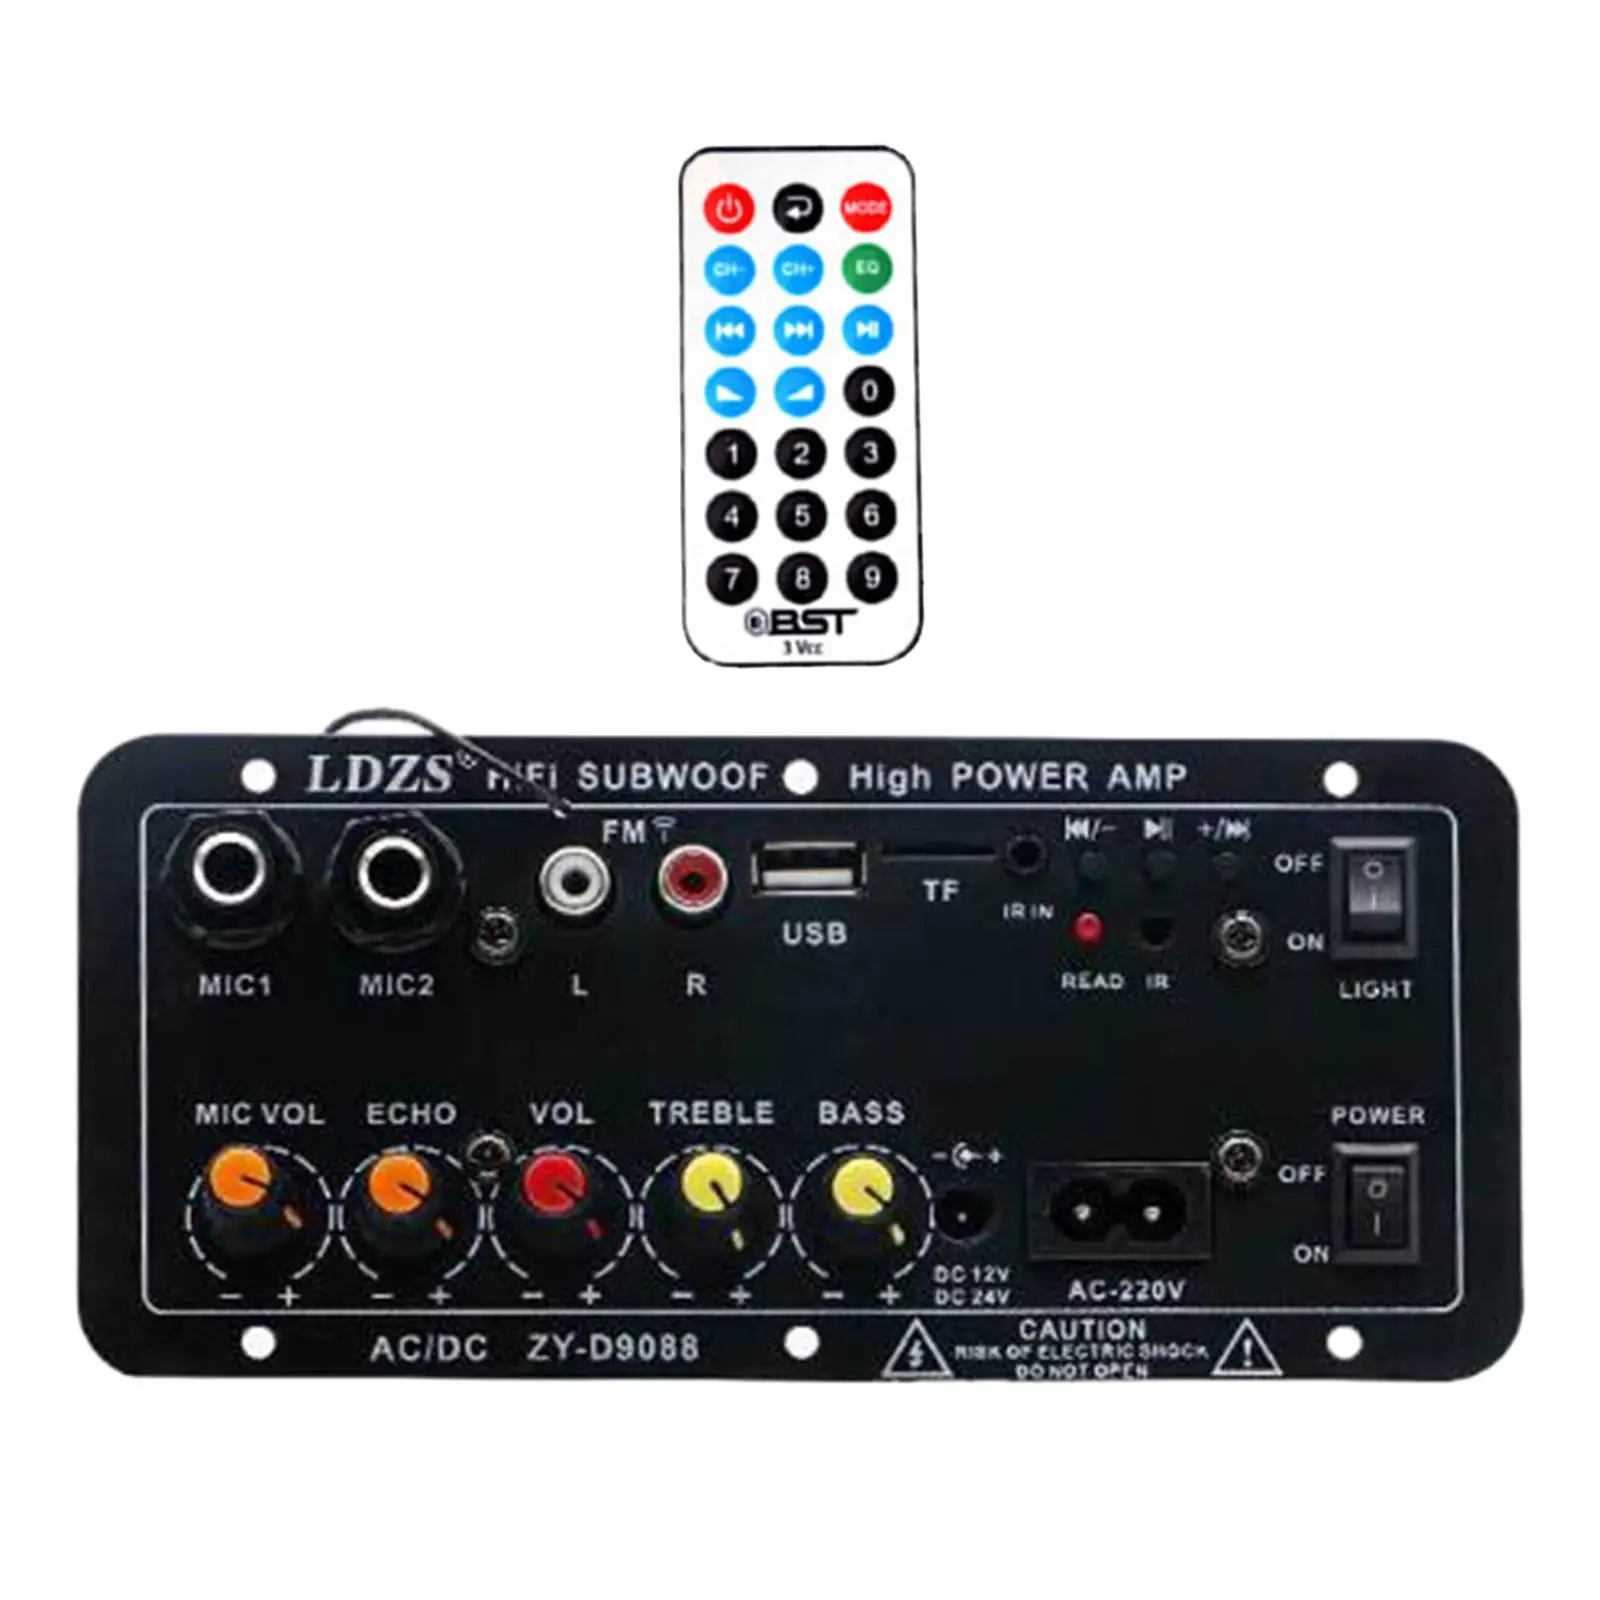 Microphone Karaoke Power Amplifier Board High Performance Professional Audio Mixer for KTV Motorcycles Smartphones PC Cars